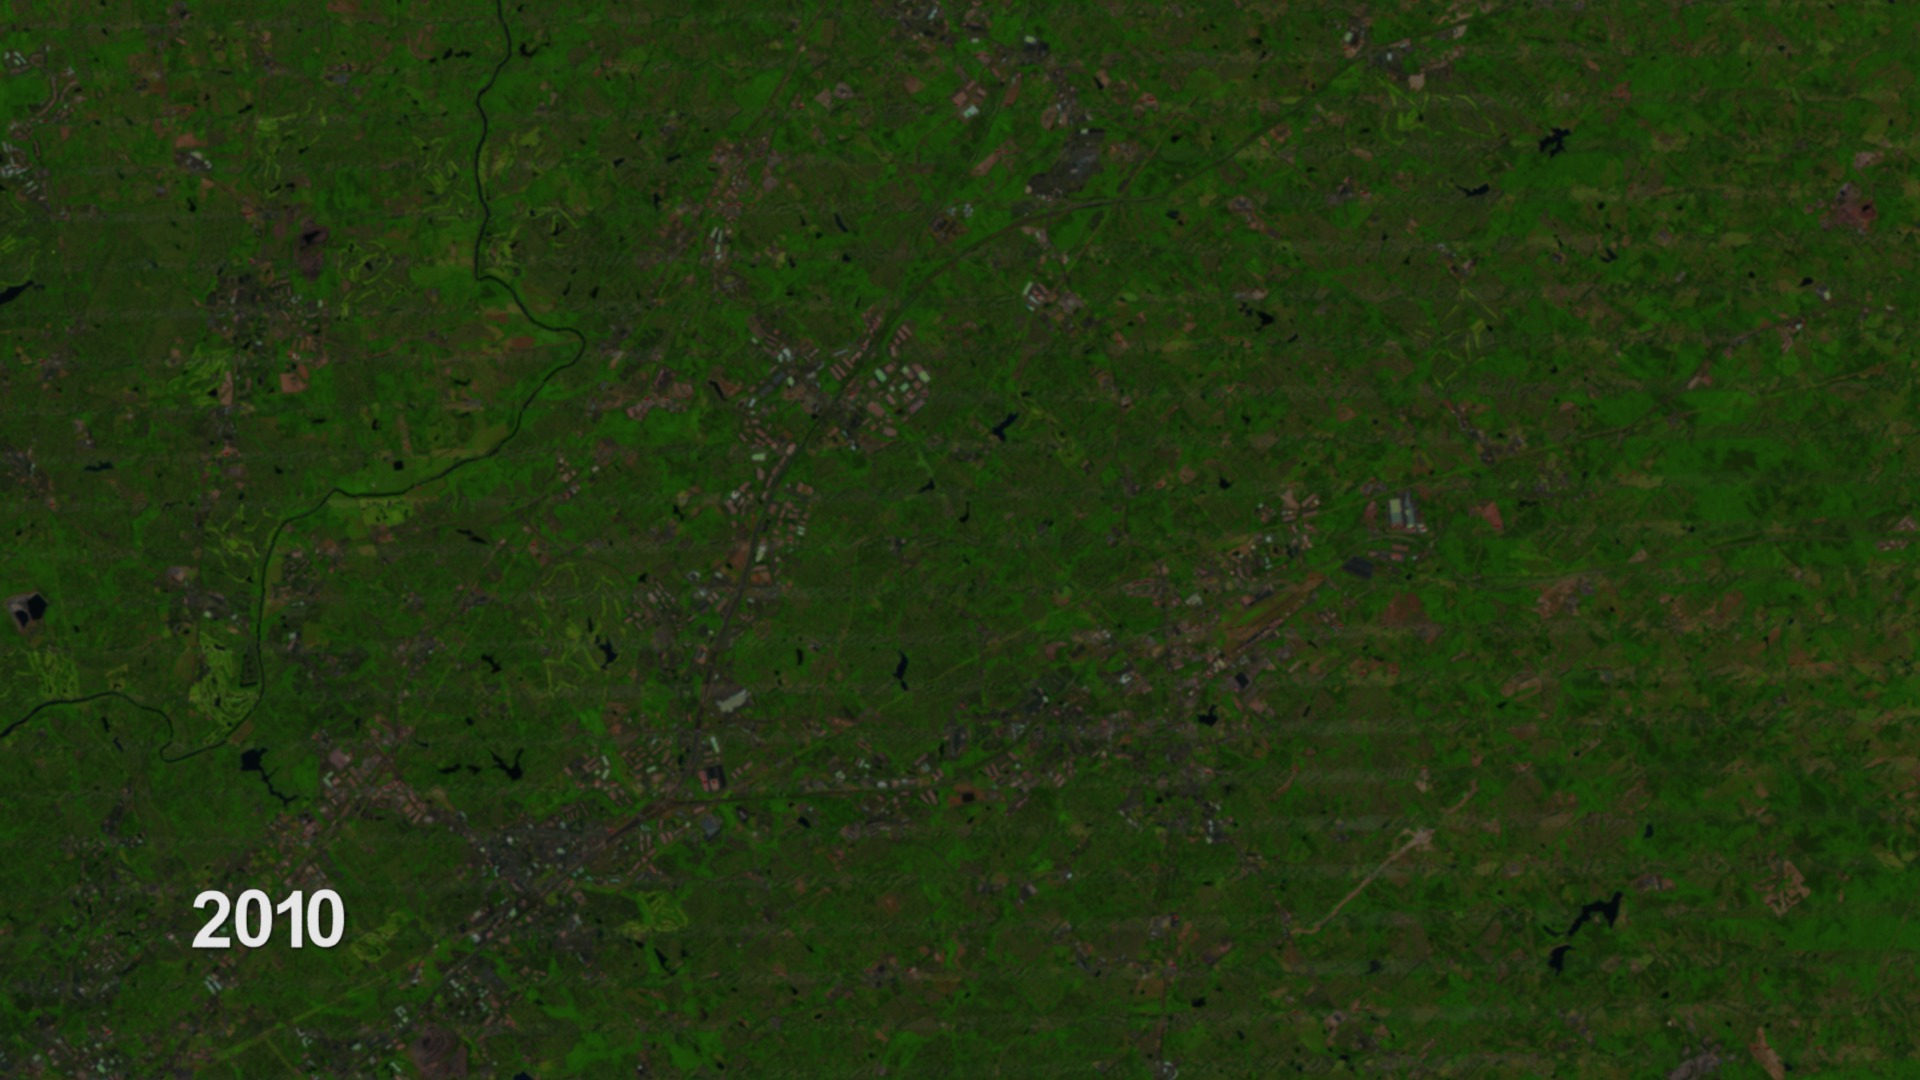 Animation of a Northeastern suburb of Atlanta from 1984 to 2010 through the eyes of Landsat satellite images.  The animation begins with a view of the United States and zooms into the Atlanta suburb, which then cycles through Landsat images of the area from 1984 to 2010.  While the animation moves through time, the viewer should be able to see the Mall of Georgia spring into existence along with the growth of all the surrounding neighborhoods.